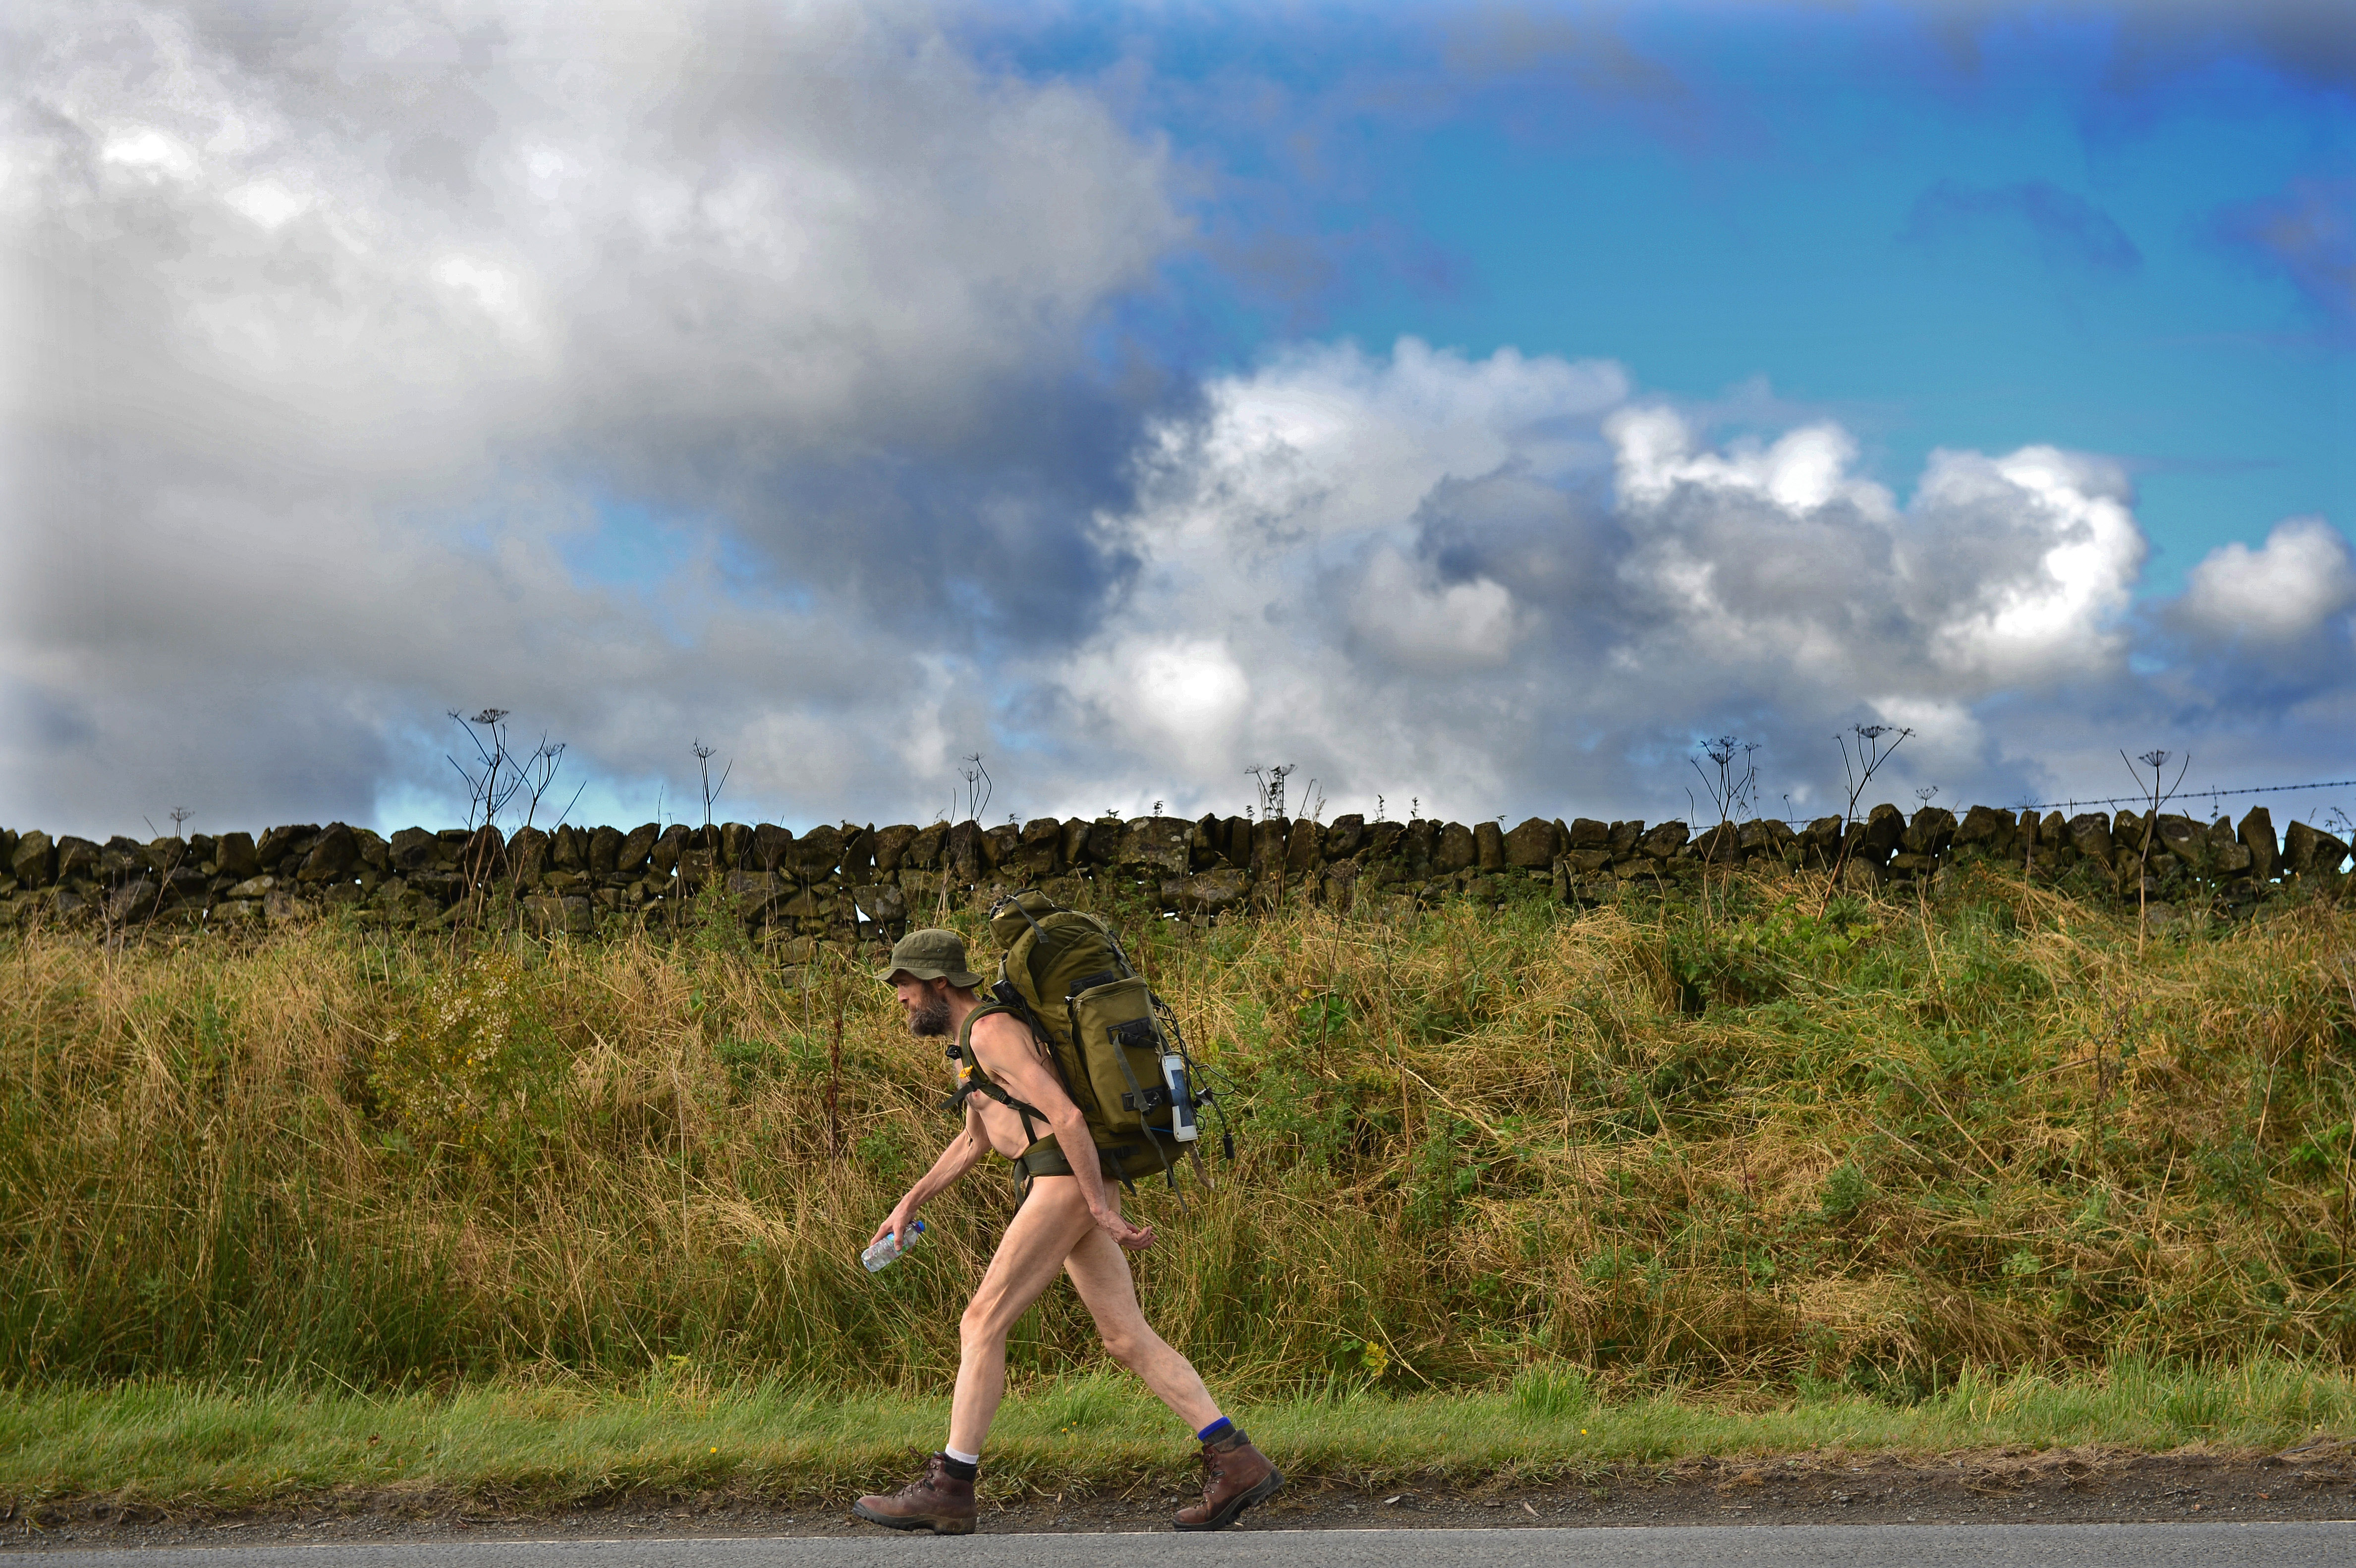 Stephen Gough the naked rambler makes his way south through Scotland following his release from Saughton Prison yesterday after serving his latest sentence on Oct. 6, 2012 in Peebles, Scotland. (Jeff J Mitchell—Getty Images)